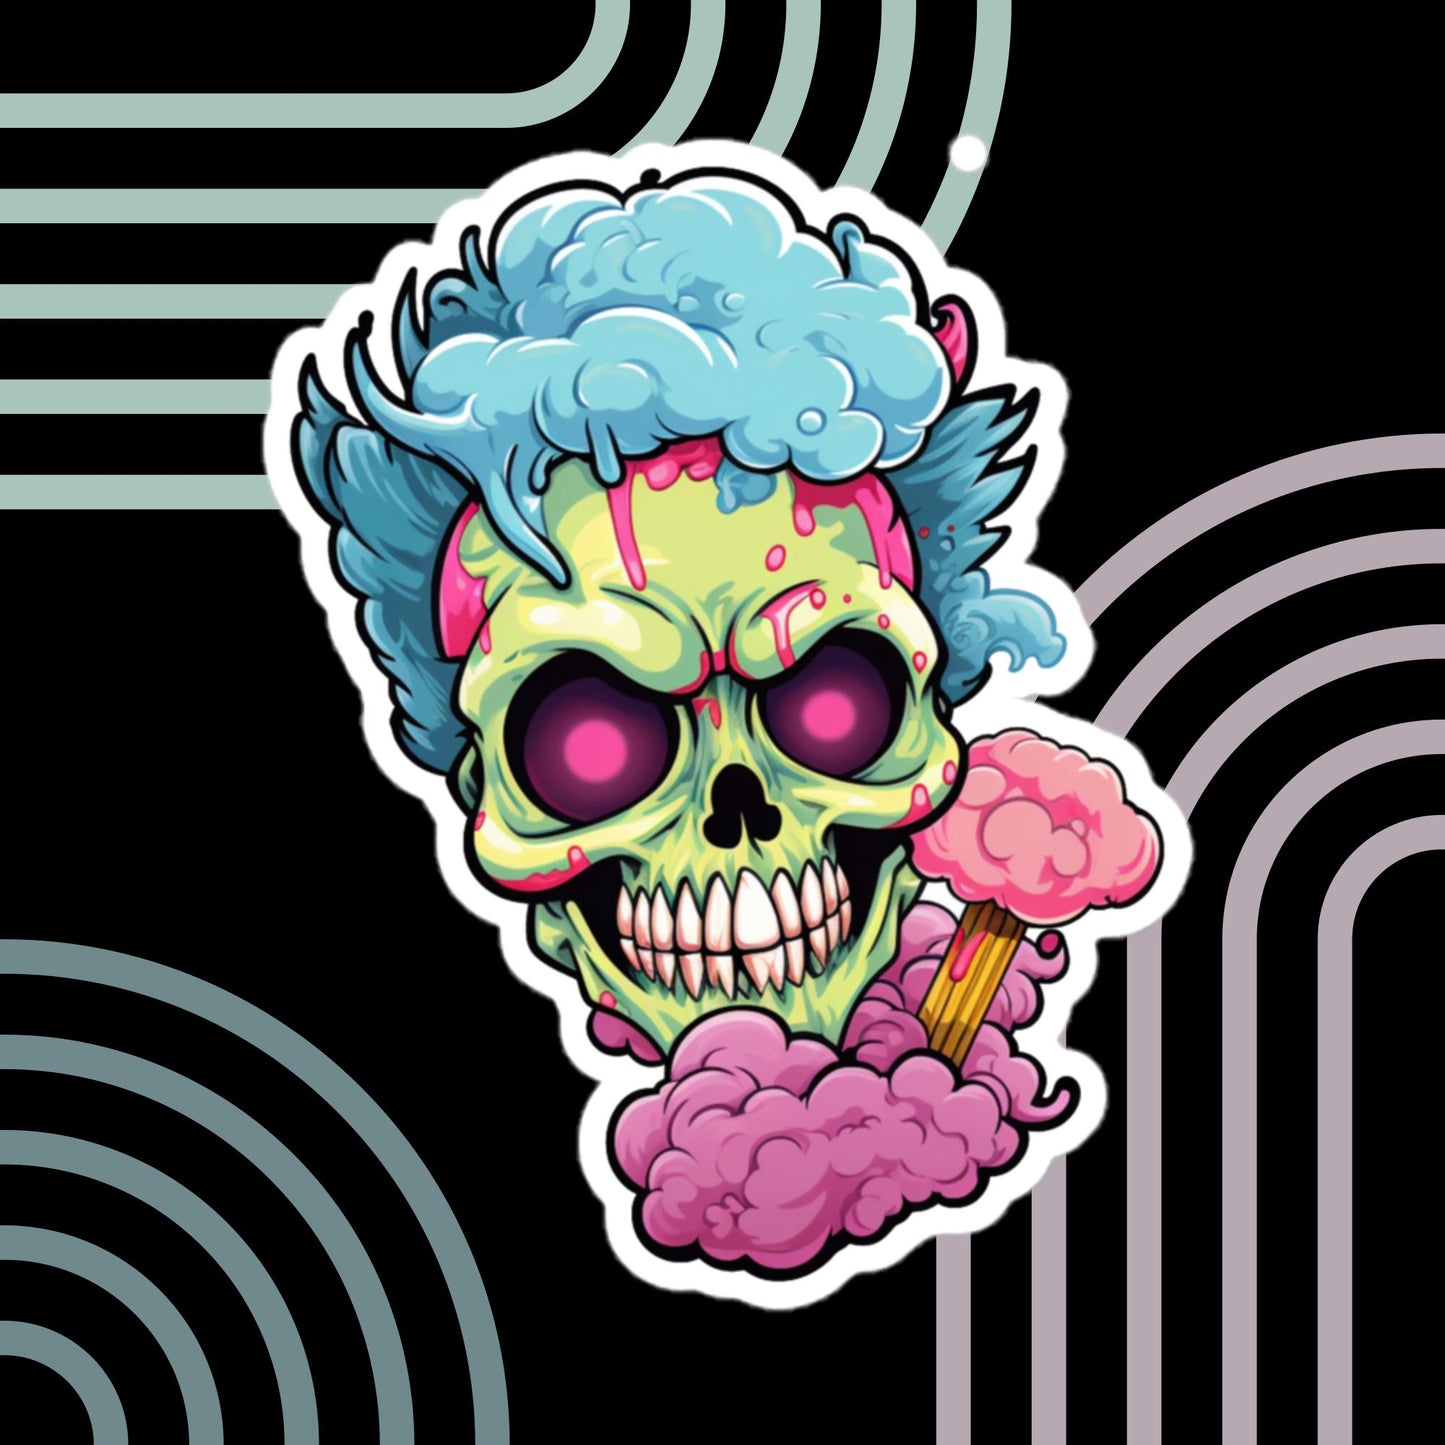 Zombie Cotton Candy Super Cool!